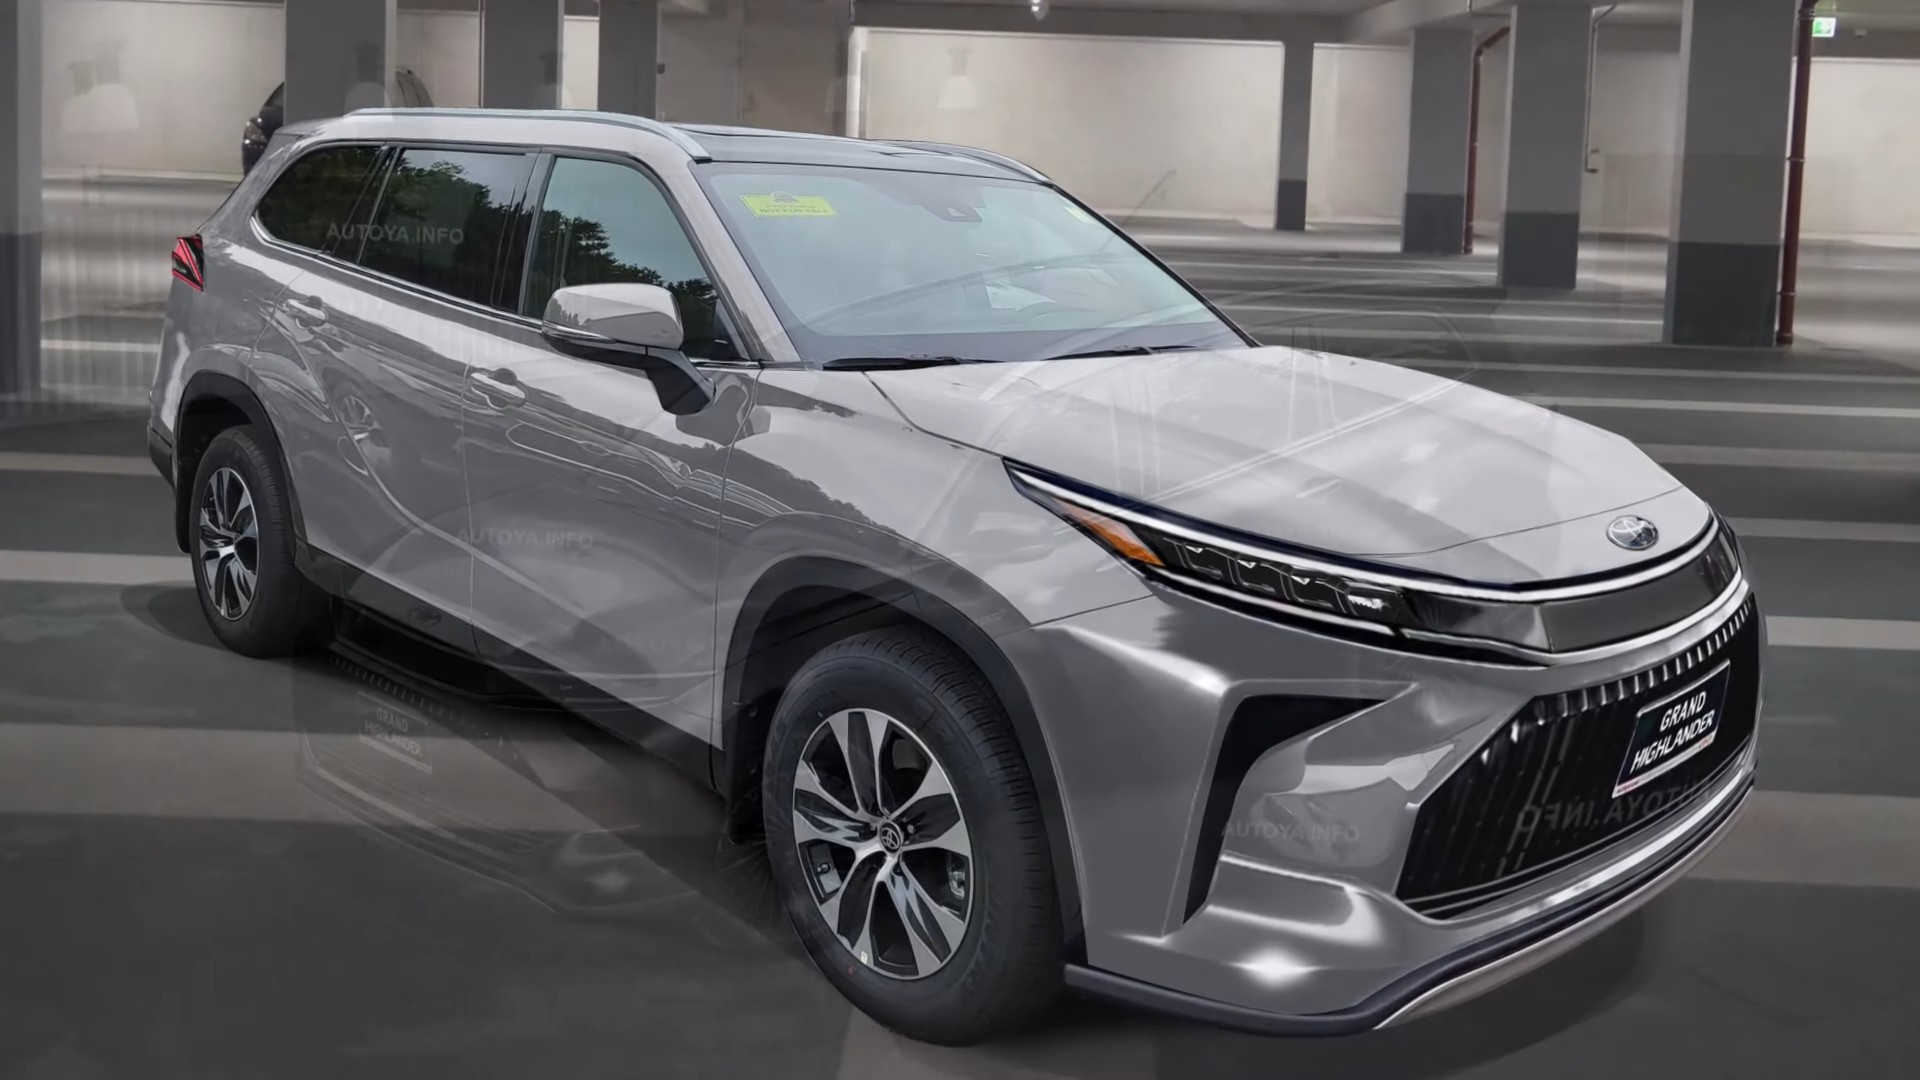 2024 Toyota Grand Highlander 7/8Seat CUV Reveals Everything, Though